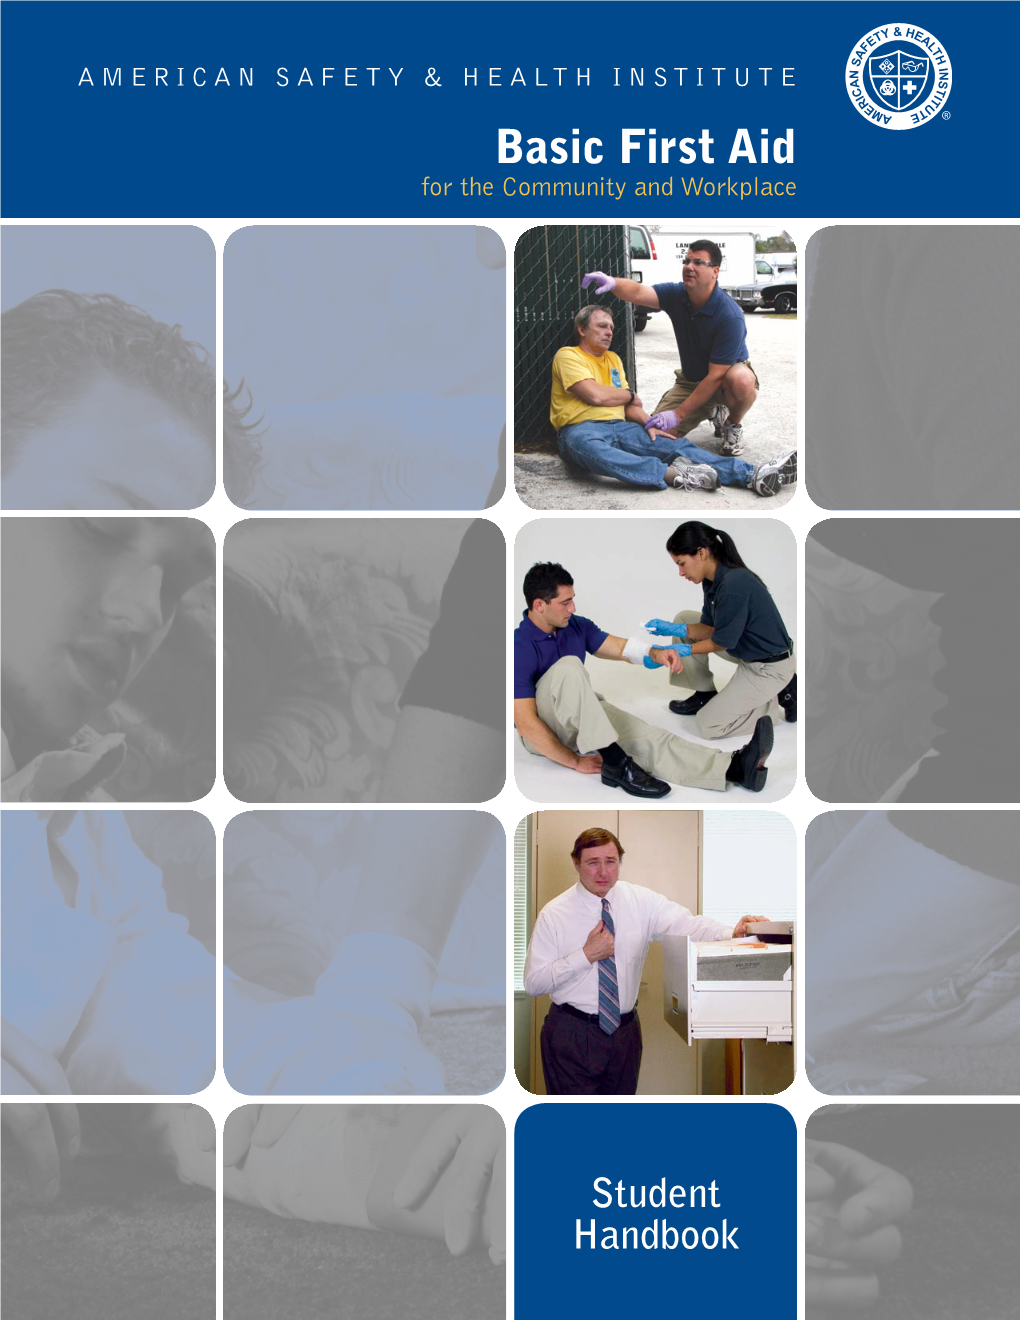 Basic First Aid for the Community and Workplace